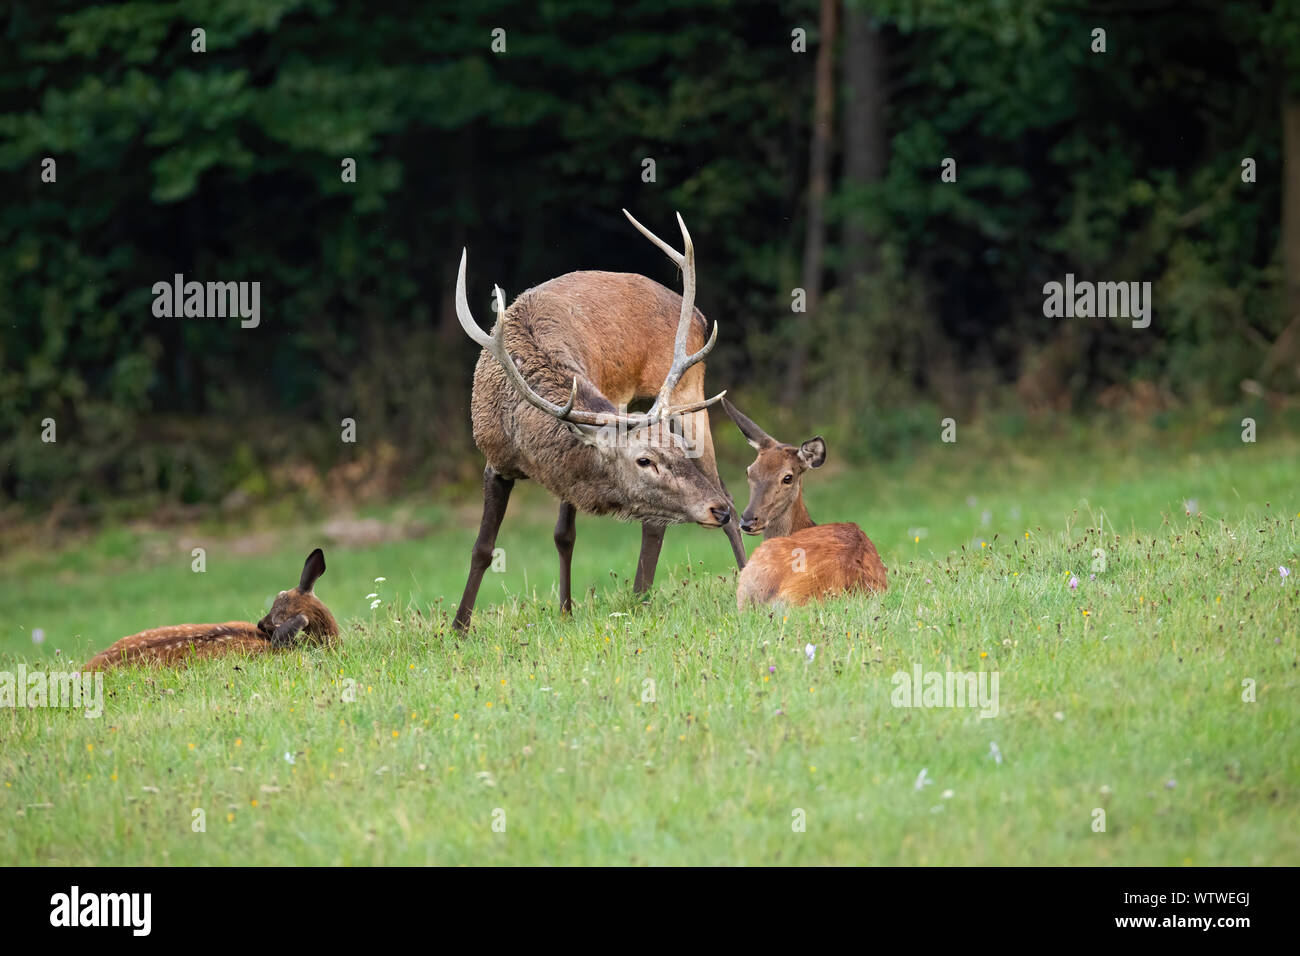 Red deer, Cervus elaphus, stag and doe kissing in wilderness with copy space. Parent mammals with young nearby. Concept of proximity and togetherness Stock Photo